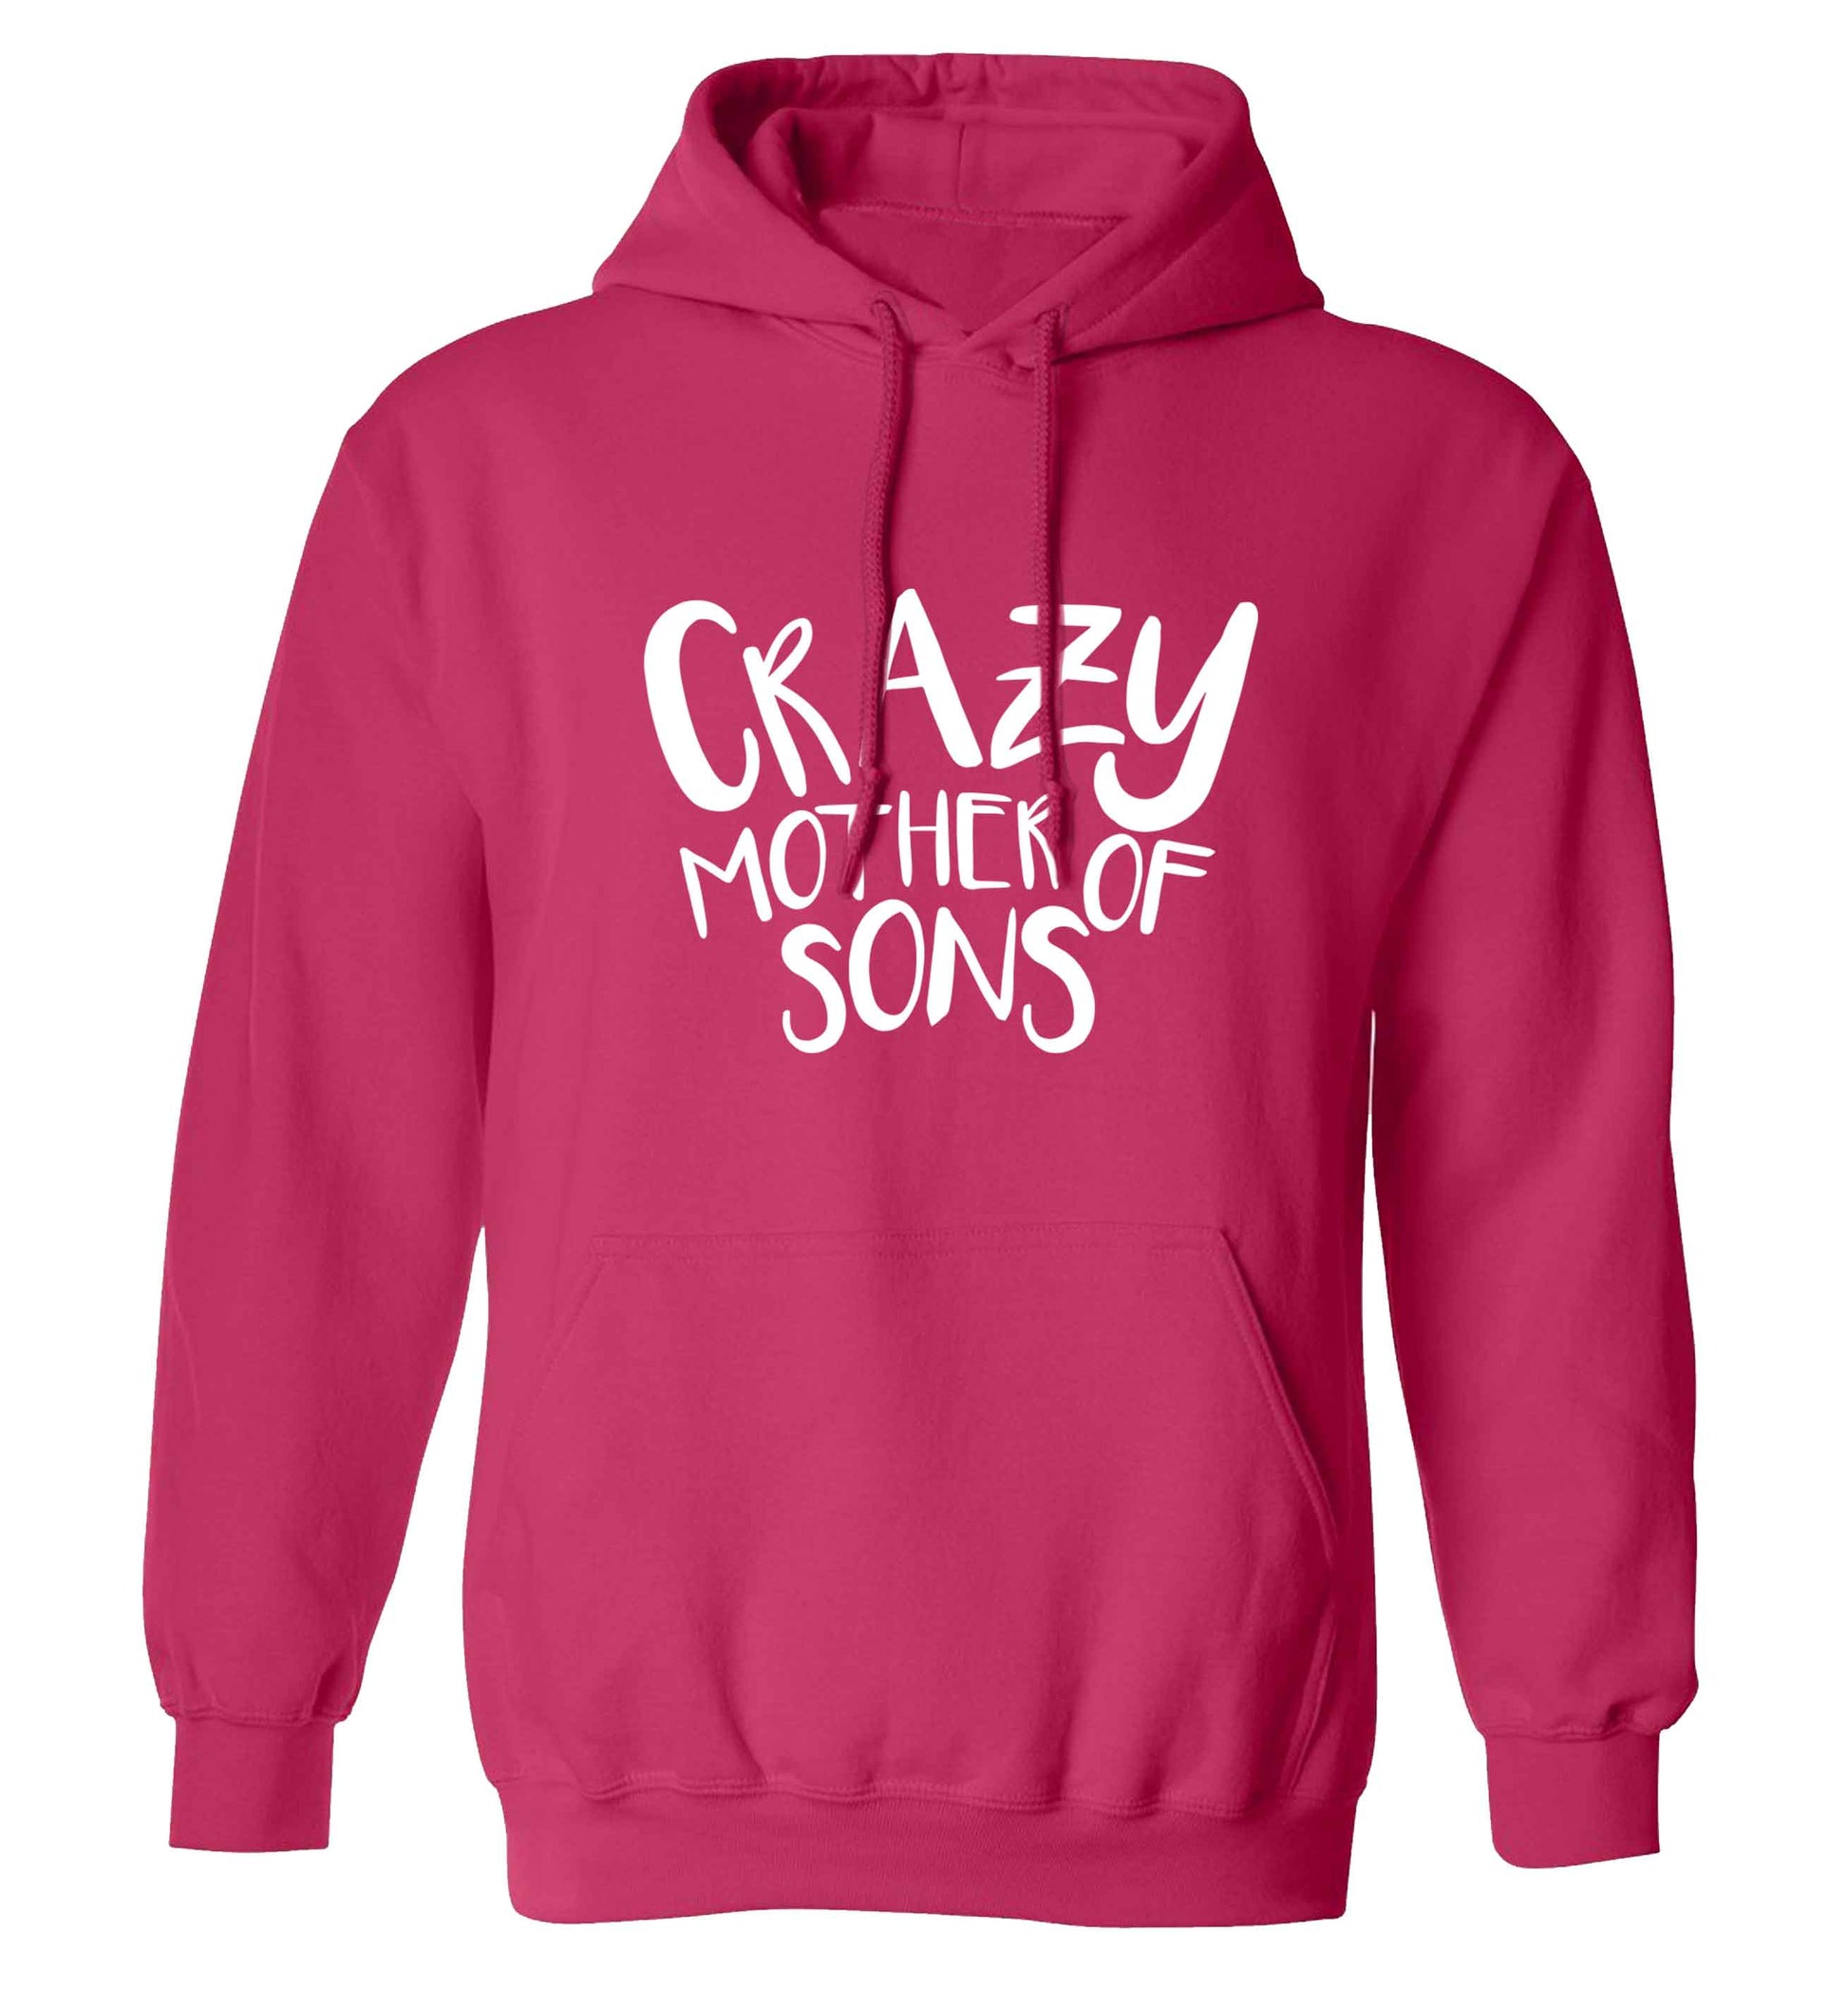 Crazy mother of sons adults unisex pink hoodie 2XL